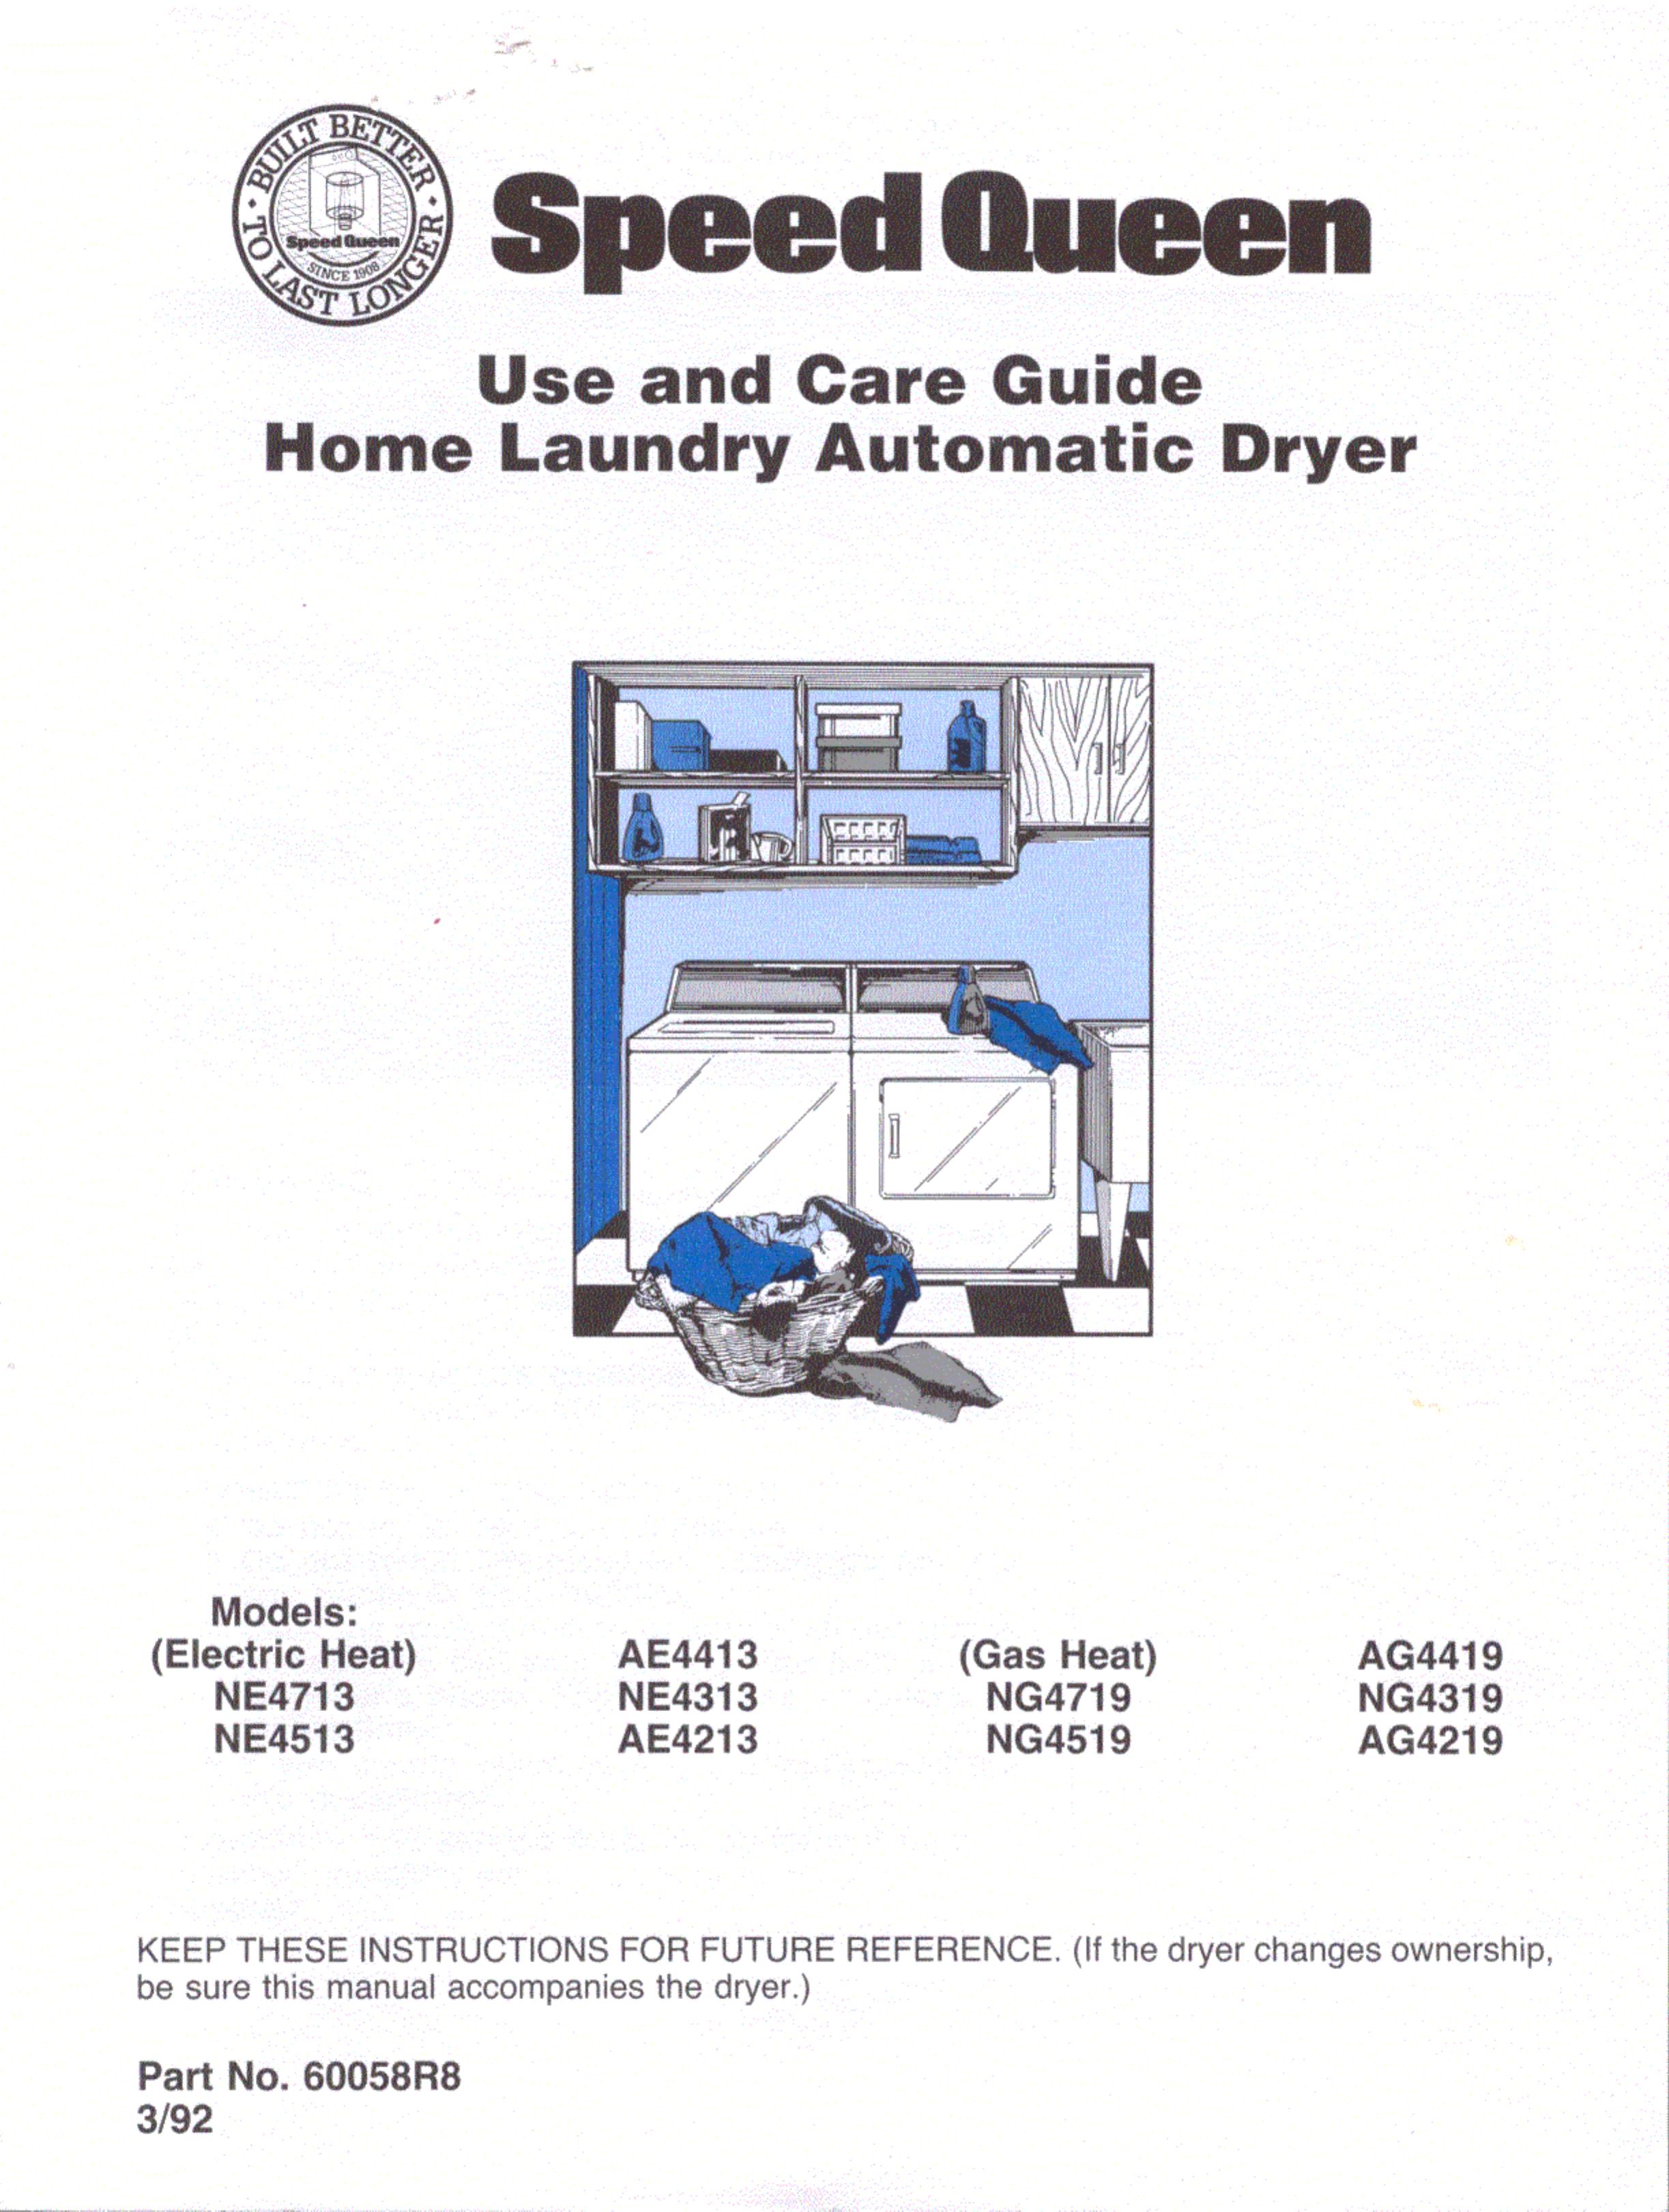 Speed Queen AG4219 Clothes Dryer User Manual